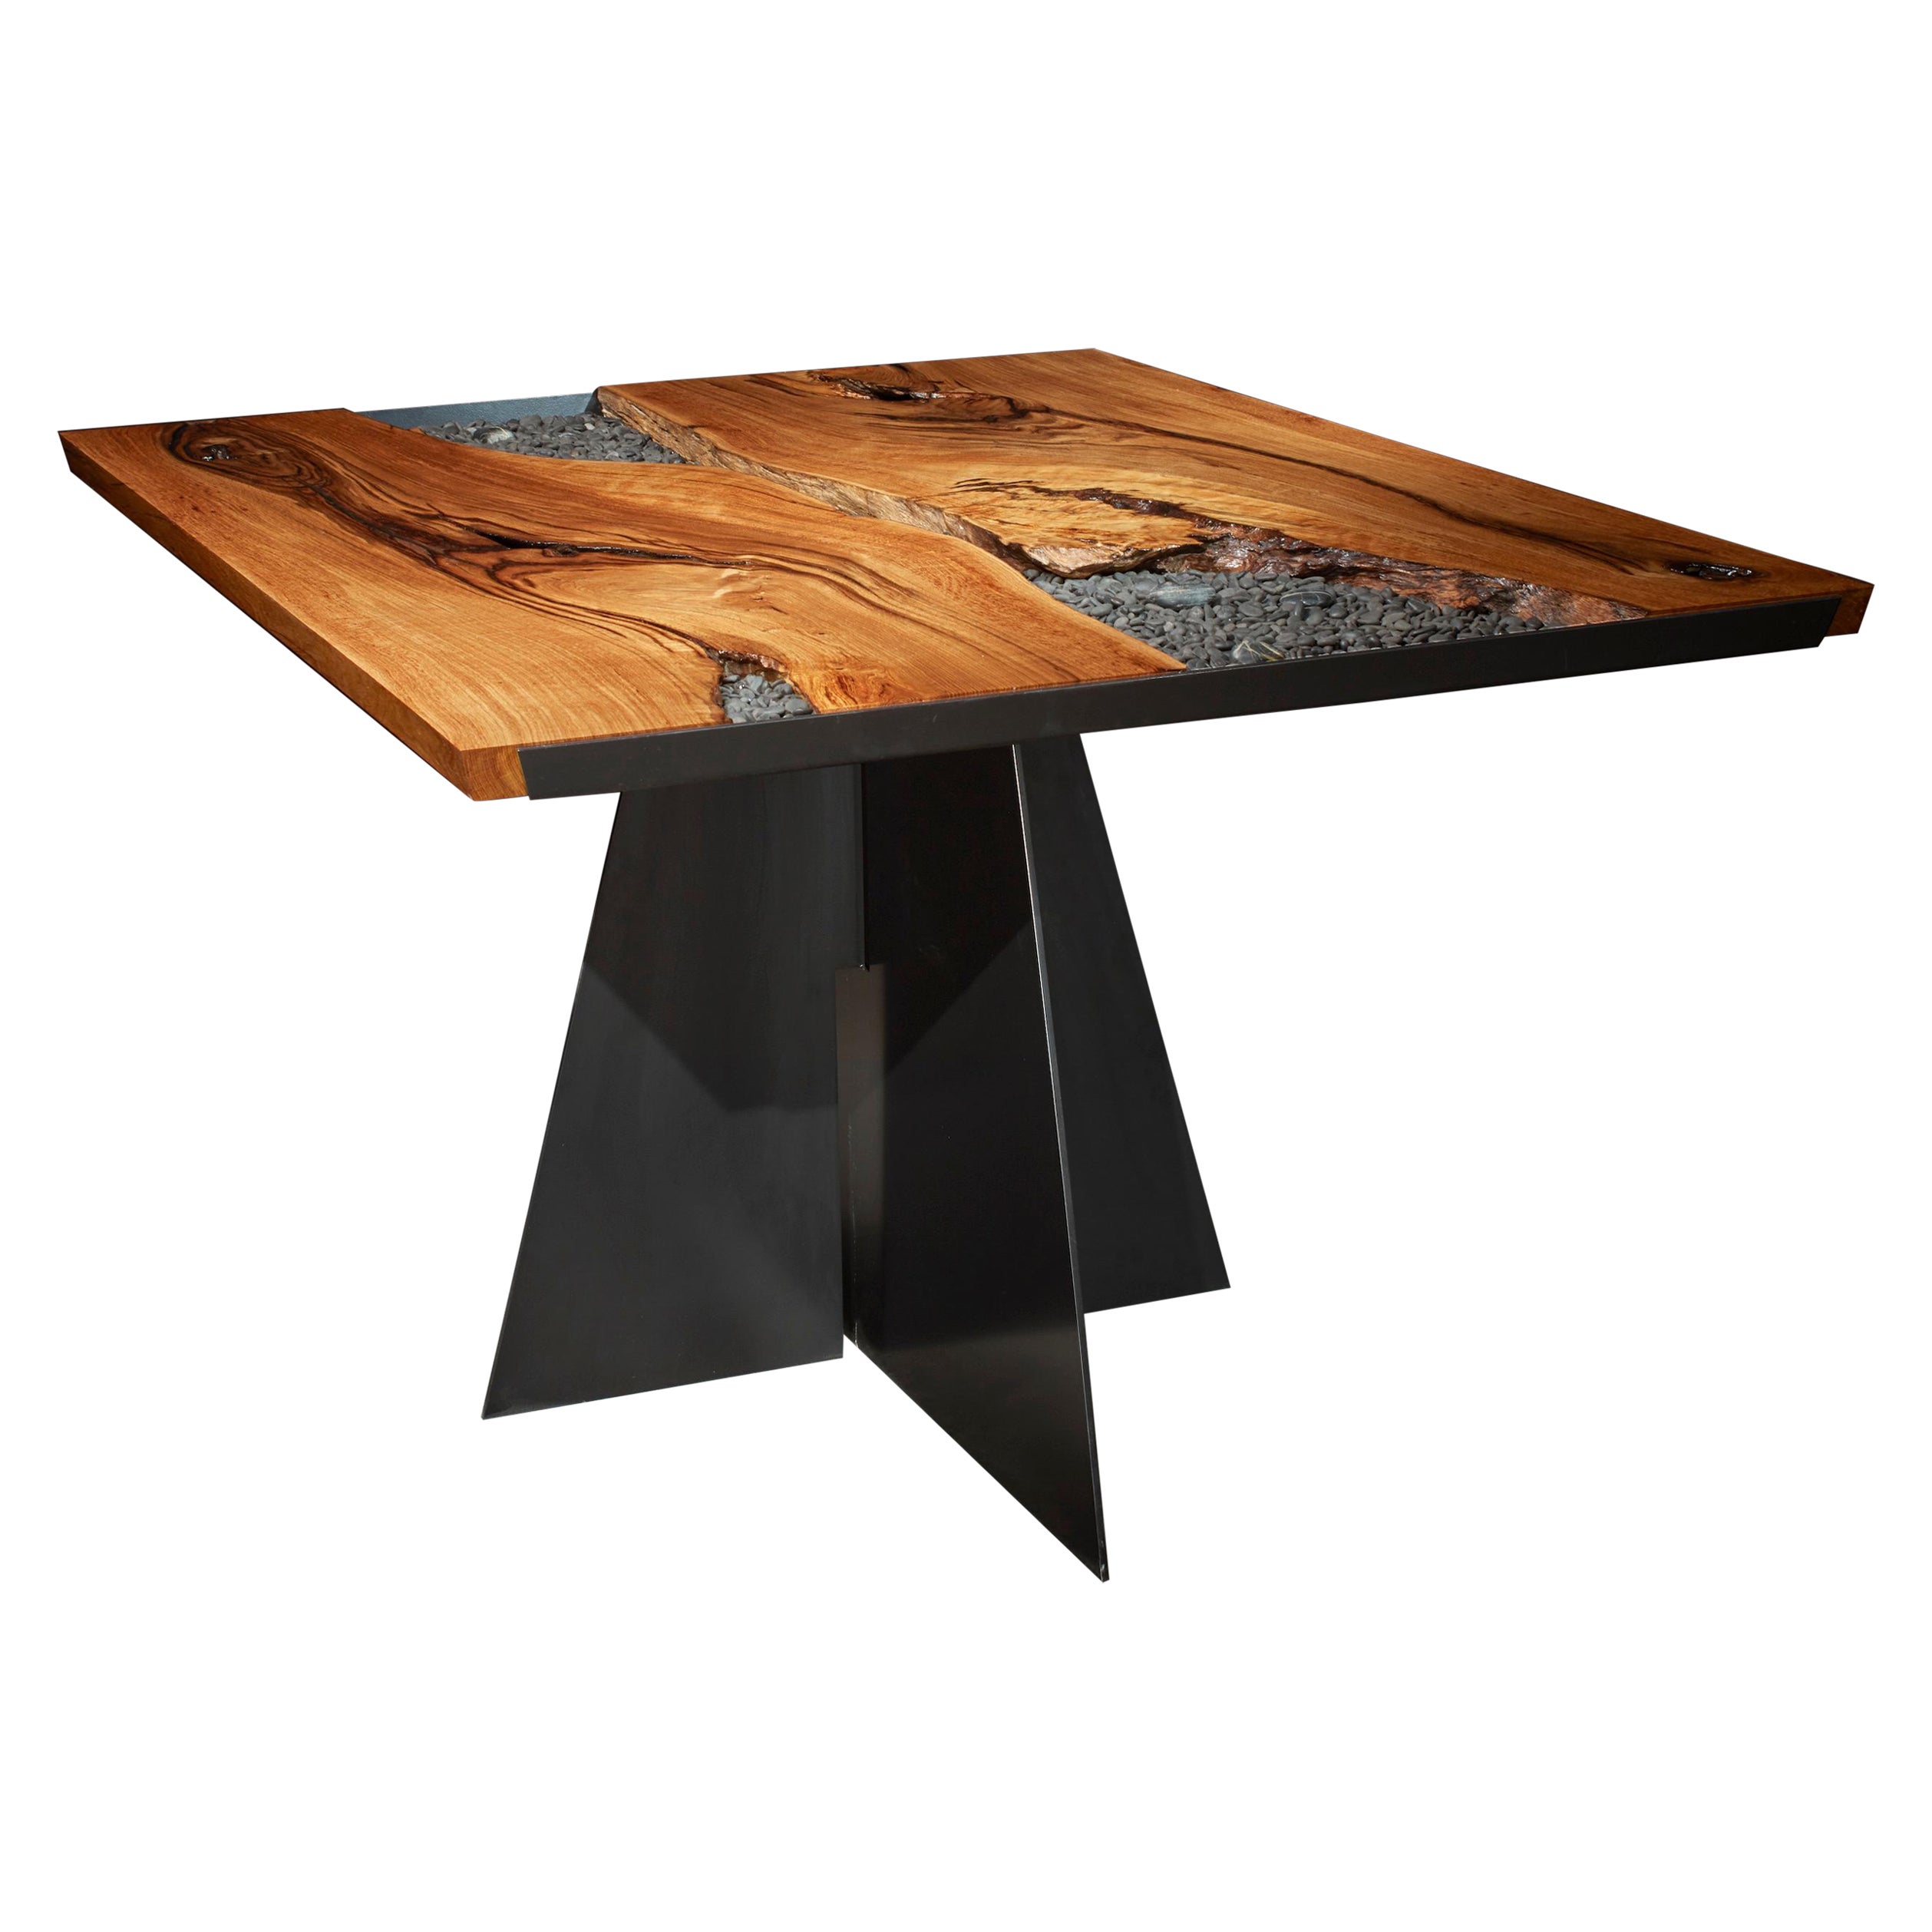 Organic Modern Dining Table with California White Oak and Aluminum: Wisdom